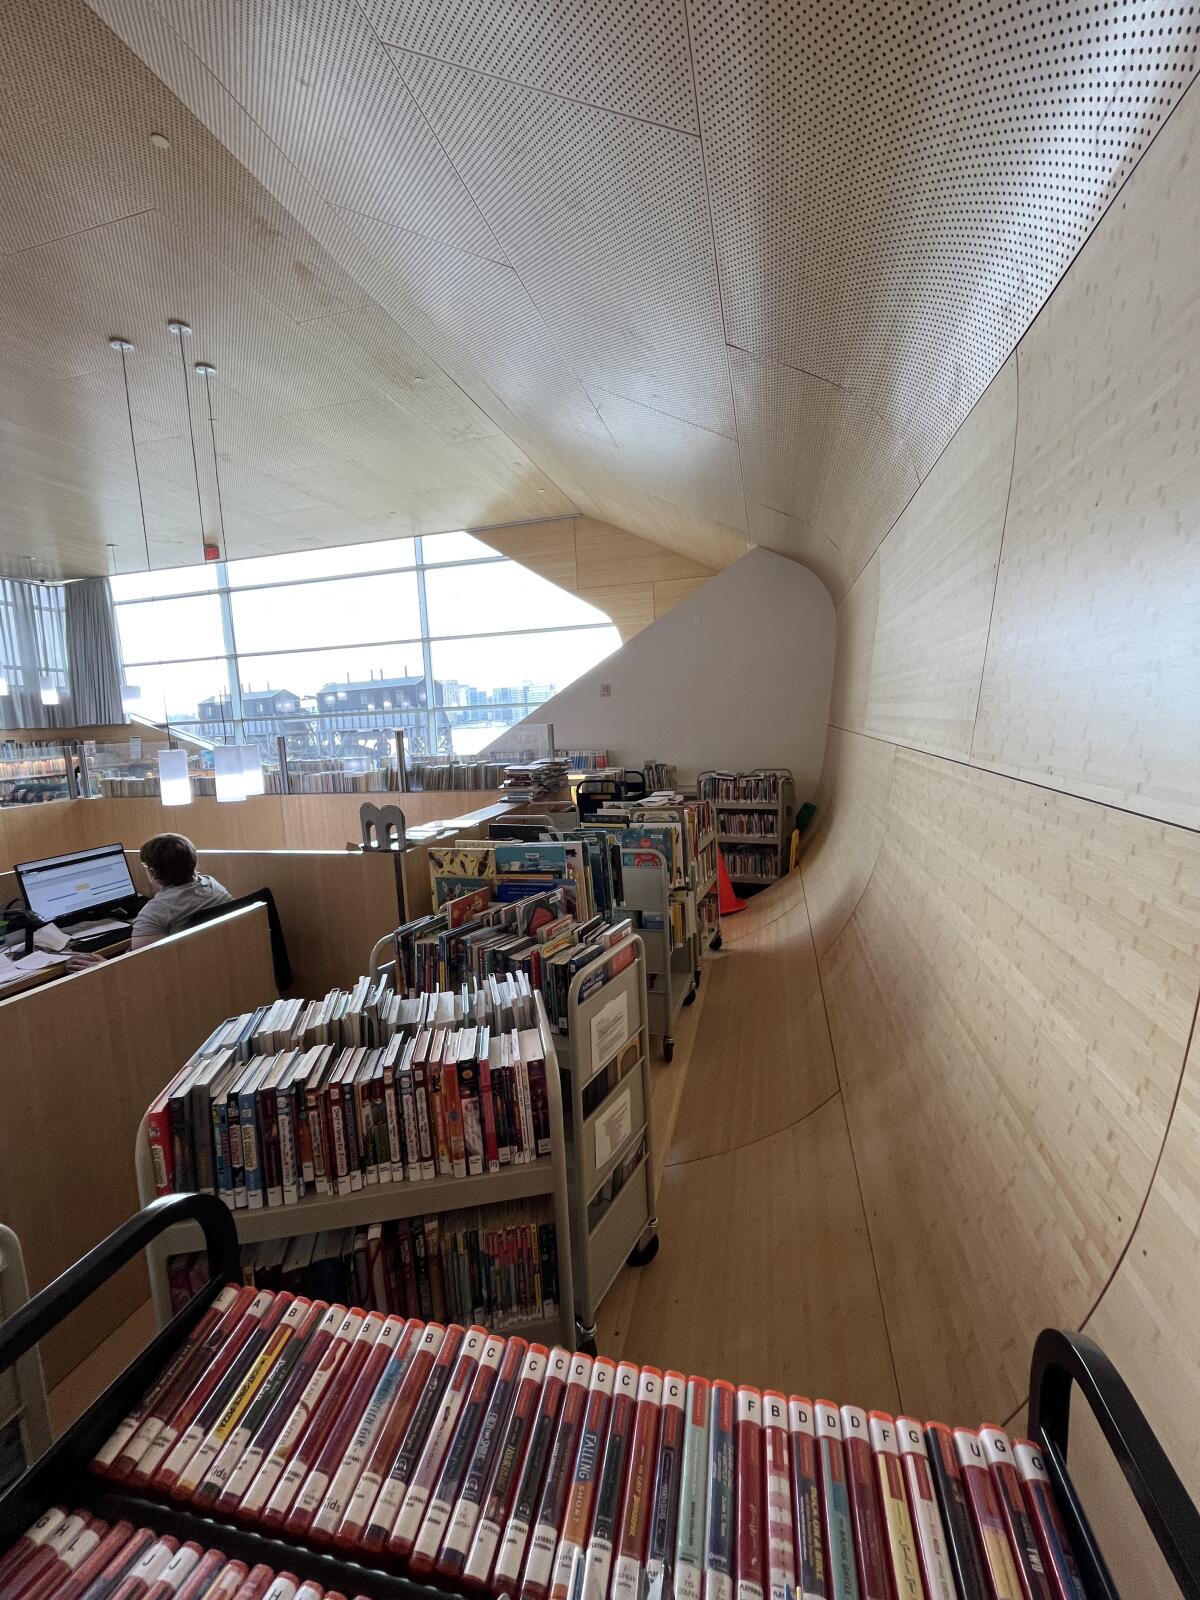 Carts pile up at the base of a curving wooden wall in a library children's area